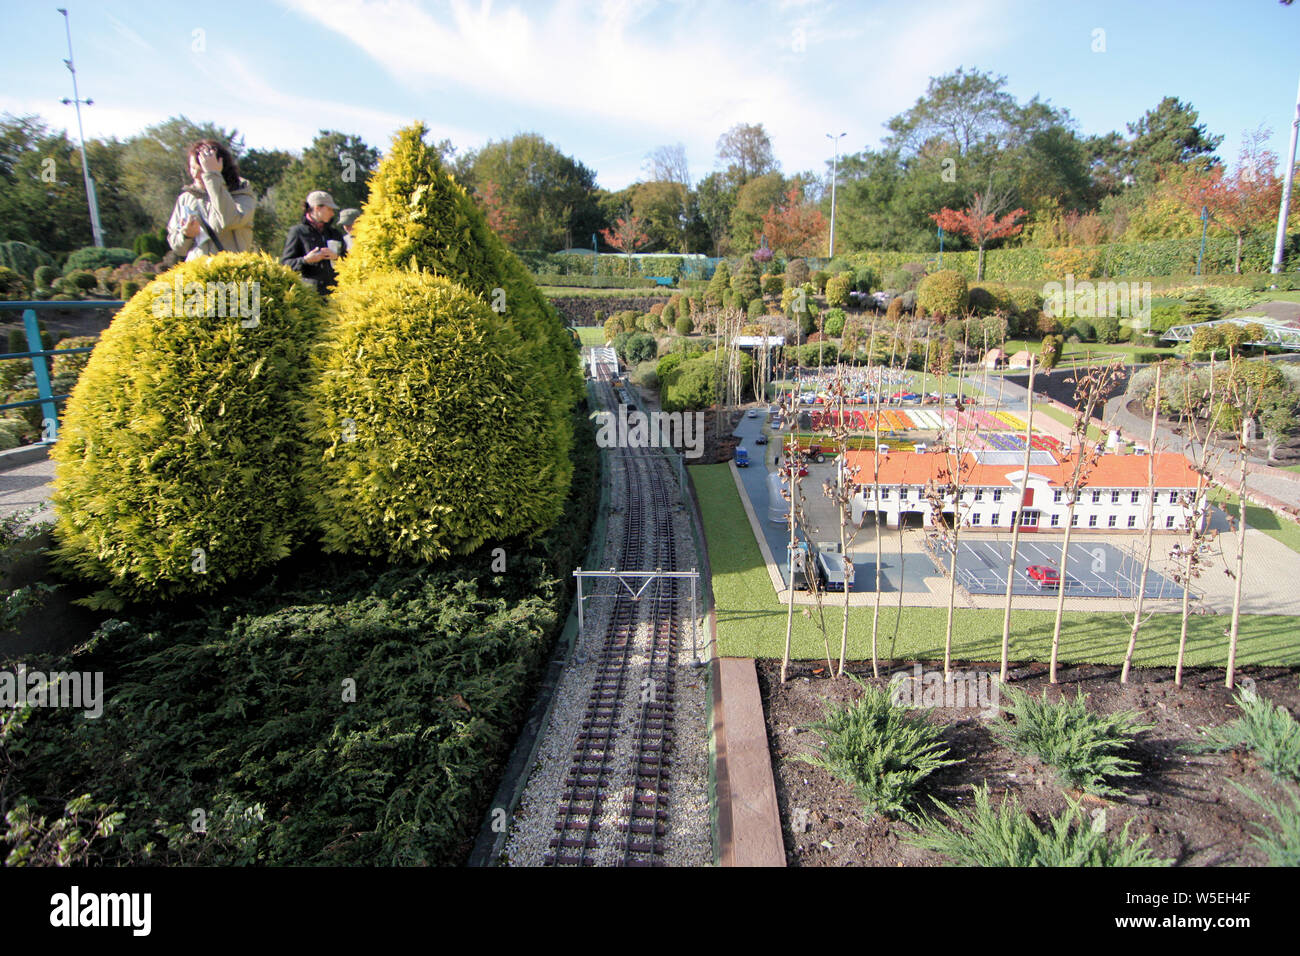 Madurodam has more than 5,500 miniature trees and 55,000 flower bed plants blossoming all season, and the park is known for its scenic beauty. Stock Photo